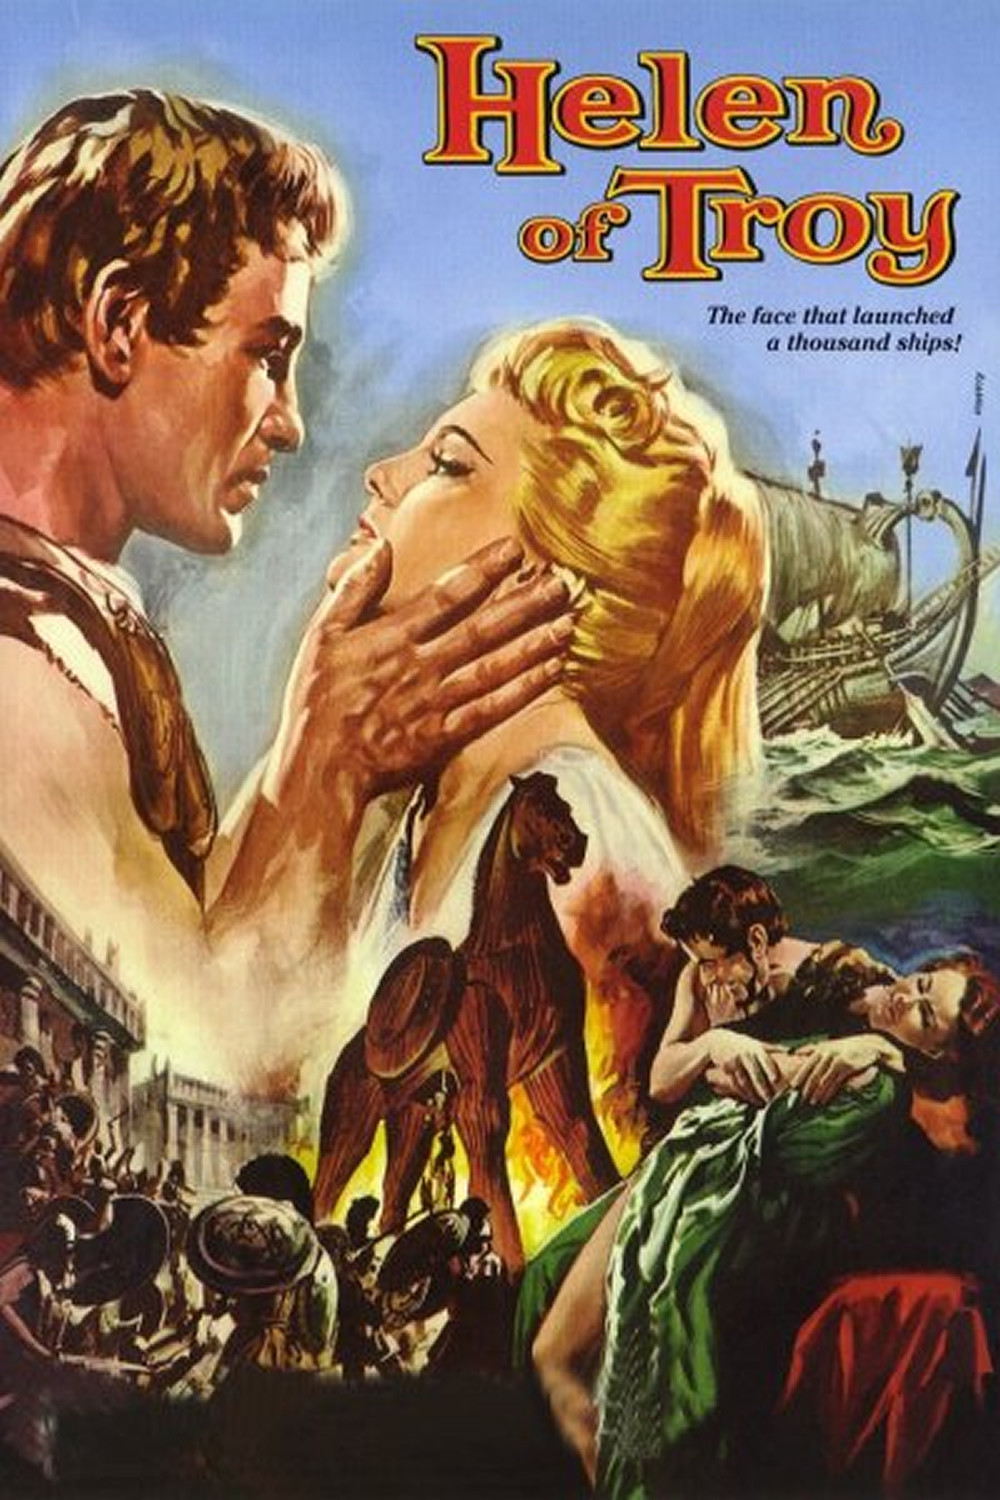 Poster for the movie "Helen of Troy"